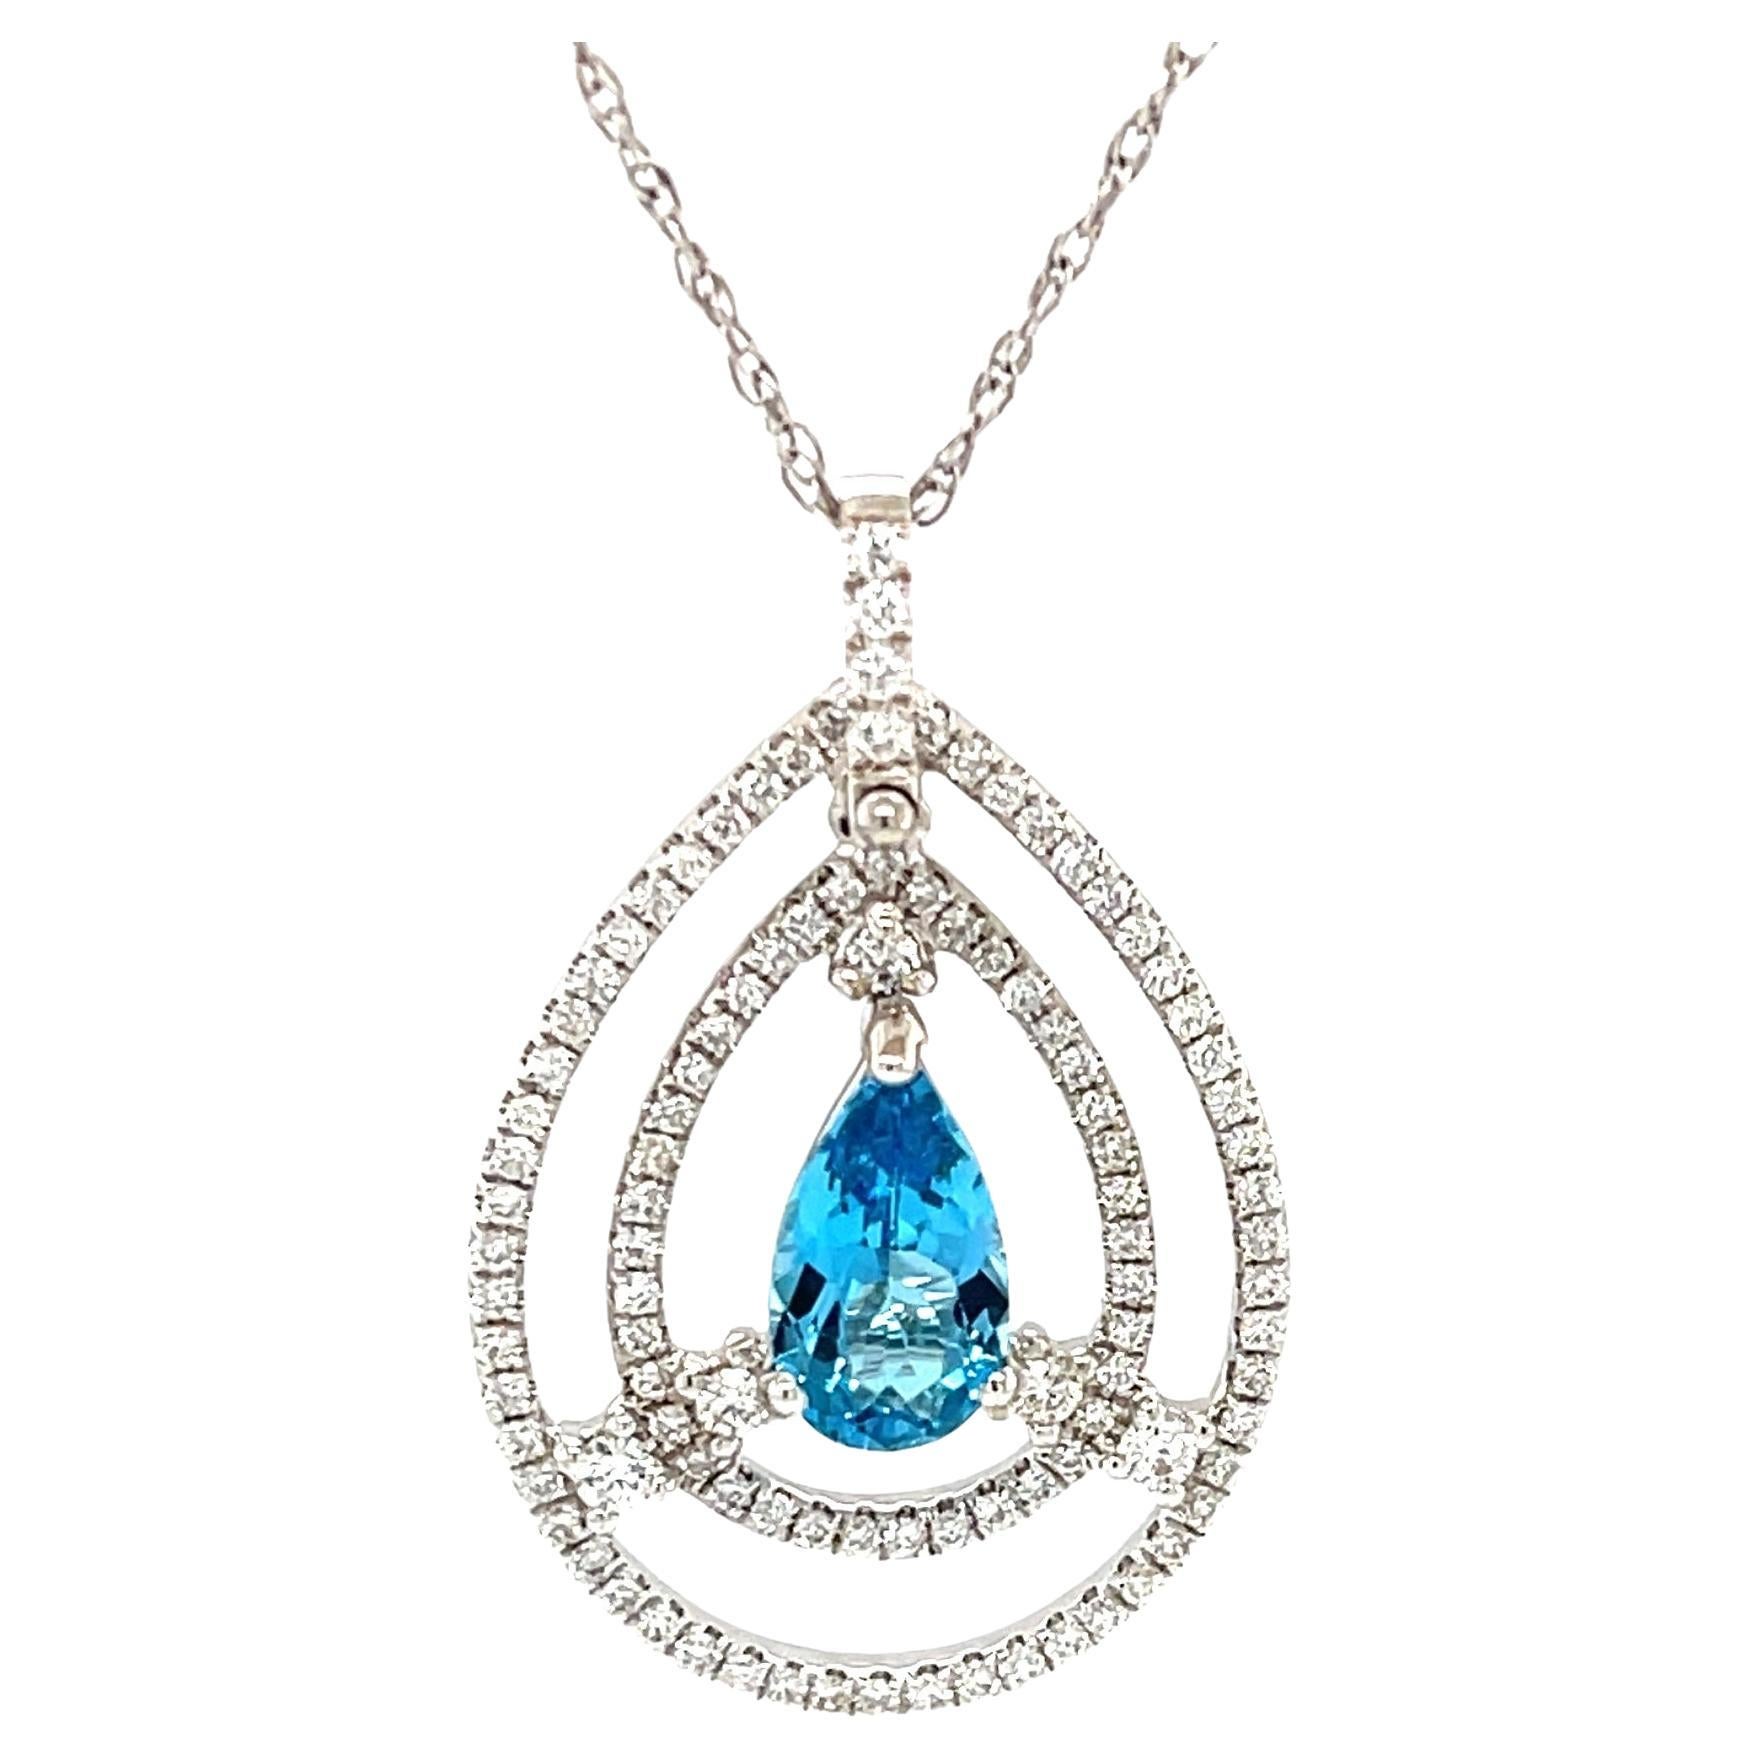 Pear Shaped Blue Topaz and Diamond Necklace in 18k White Gold